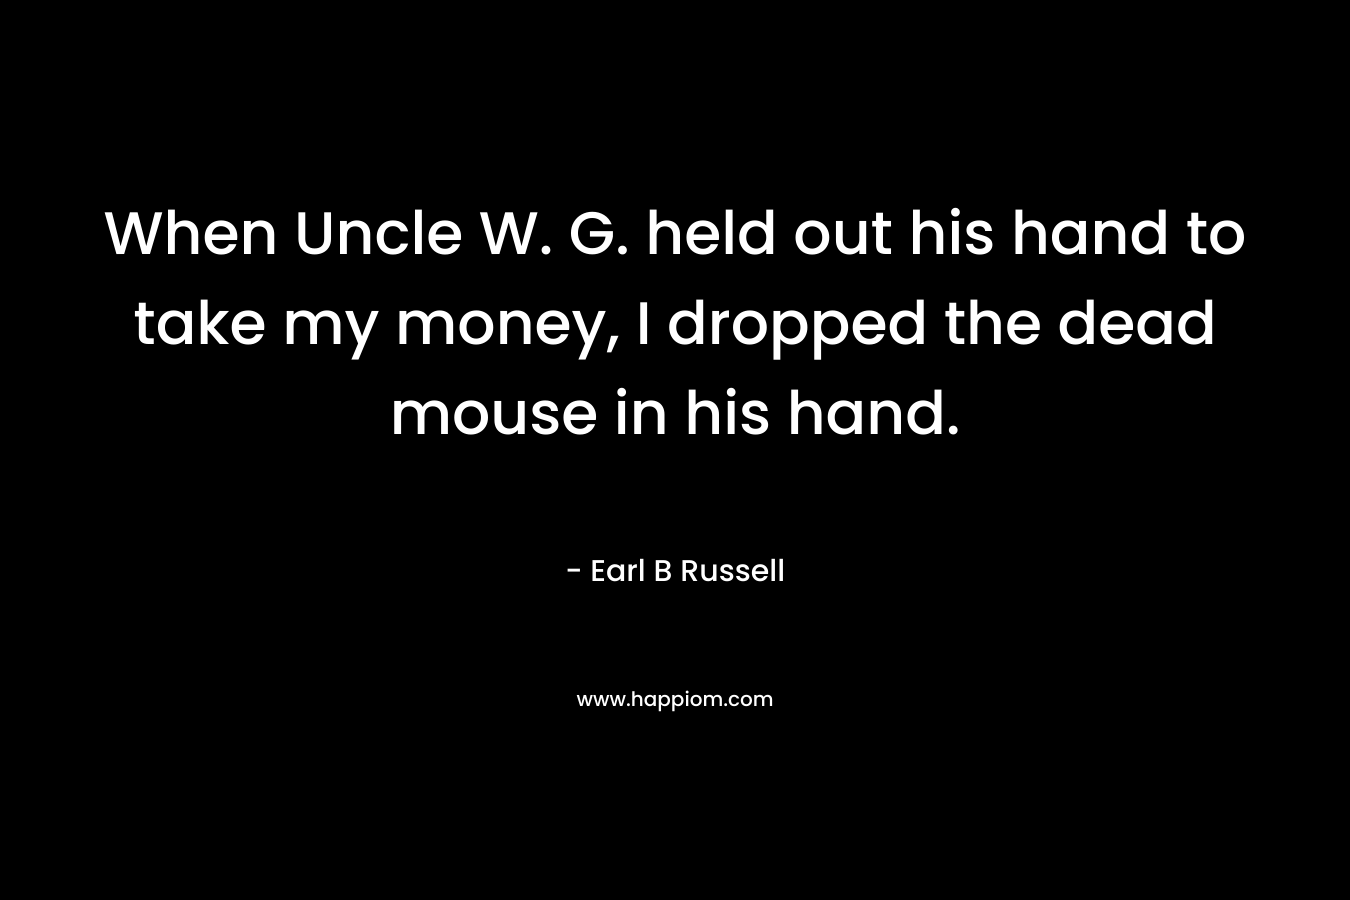 When Uncle W. G. held out his hand to take my money, I dropped the dead mouse in his hand. – Earl B Russell